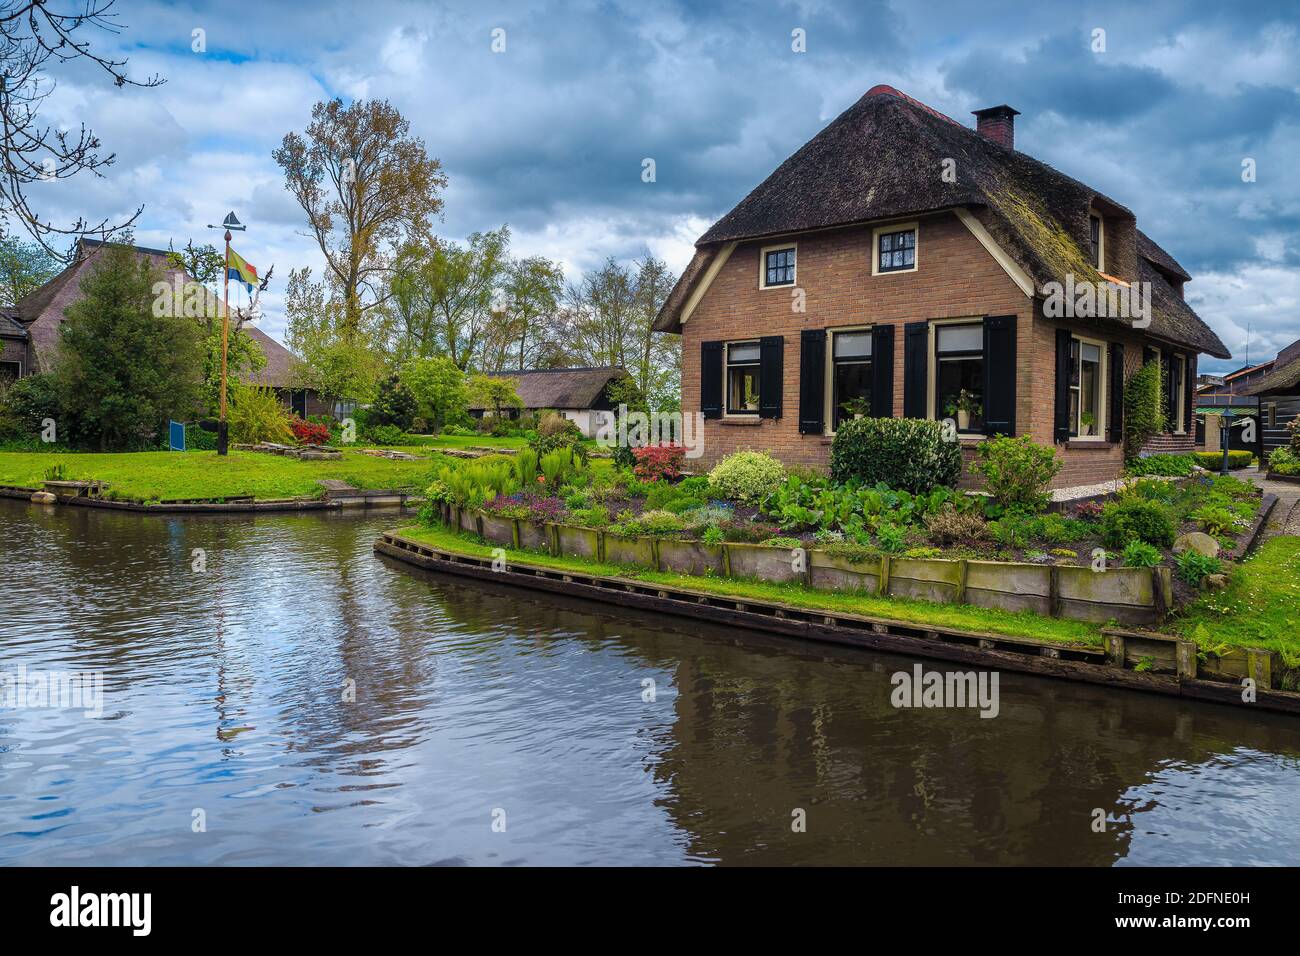 Admirable waterfront house and stunning small ornamental garden with colorful flowers, Giethoorn, Netherlands, Europe Stock Photo